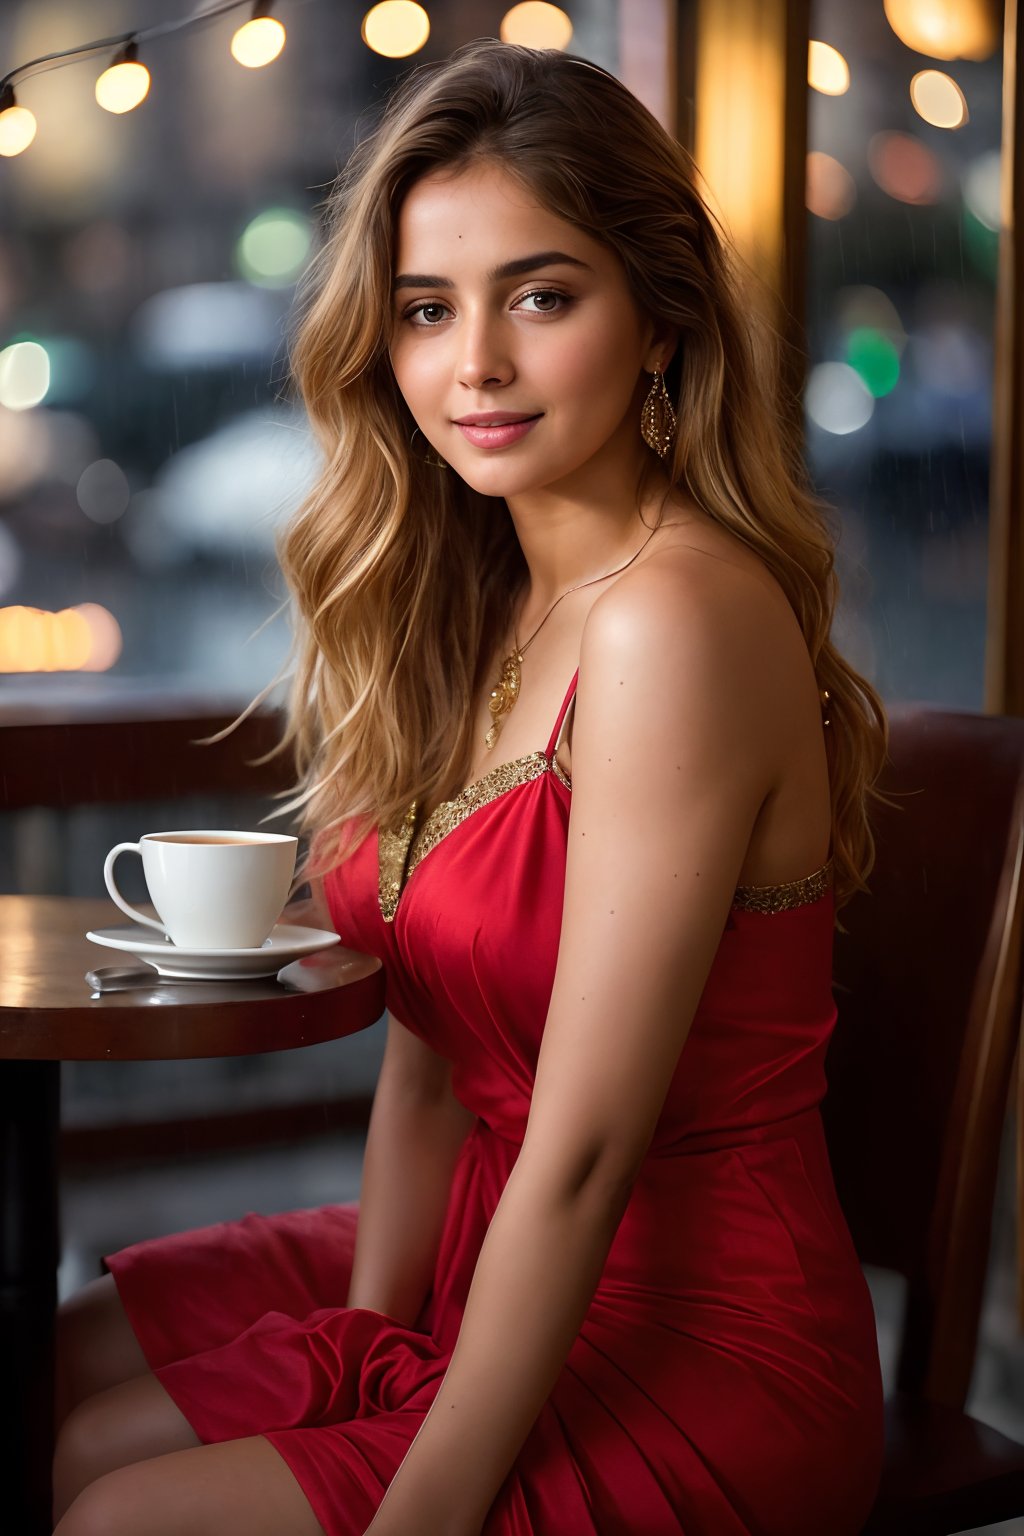 (((full body view:1.2))), stunningly beautiful "bollywood" (((extremely innocent face ))), wild hair, ((best quality)), ((masterpiece)), (detailed), ana de armas, highly detailed HDR photo, 8k quality, best quality, high resolution ultra photorealistic, high definition, highly detailed photo, photon mapping, dynamic angle, professional lighting, highly detailed face and body,expressive eyes, perfectly detailed face, smile, gorgeous face, real skin details, soft skin, looking at viewer, raw, photorealistic, real, perfect skin, real skin, realistic photo of a mid body shot, , extremely innocent face, very beautiful, cheerful, laughing, clever naughty smile, , she is wearing a loose red color gown, she smile like gentle love goddess, very long tresses, golden hair, brown hair, expressive face, divine eyes,, Wide-angle view of a pretty fashion model looking at the camera, expressing a complaint as if it's our fault, sad and thoughtful, sipping coffee in a dark, cozy coffee shop with rain outside, vibrant ambience, lively atmosphere, adorned with fairy lights and candles, captured in photorealistic detail with real skin textures, soft lighting, and presented as an absurdres masterpiece.